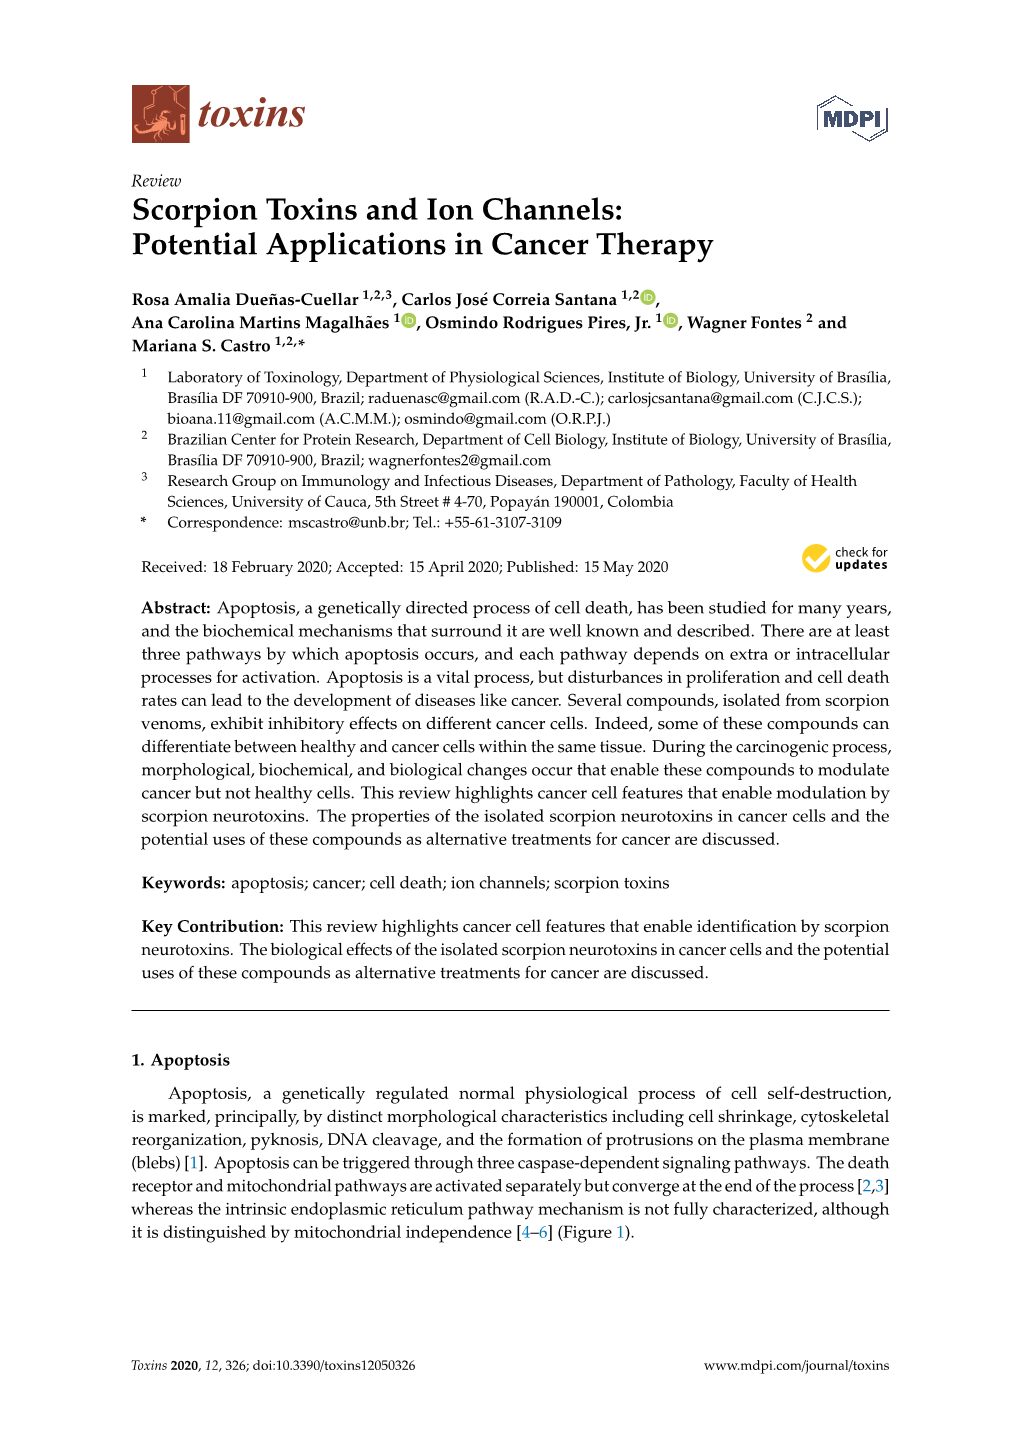 Scorpion Toxins and Ion Channels: Potential Applications in Cancer Therapy